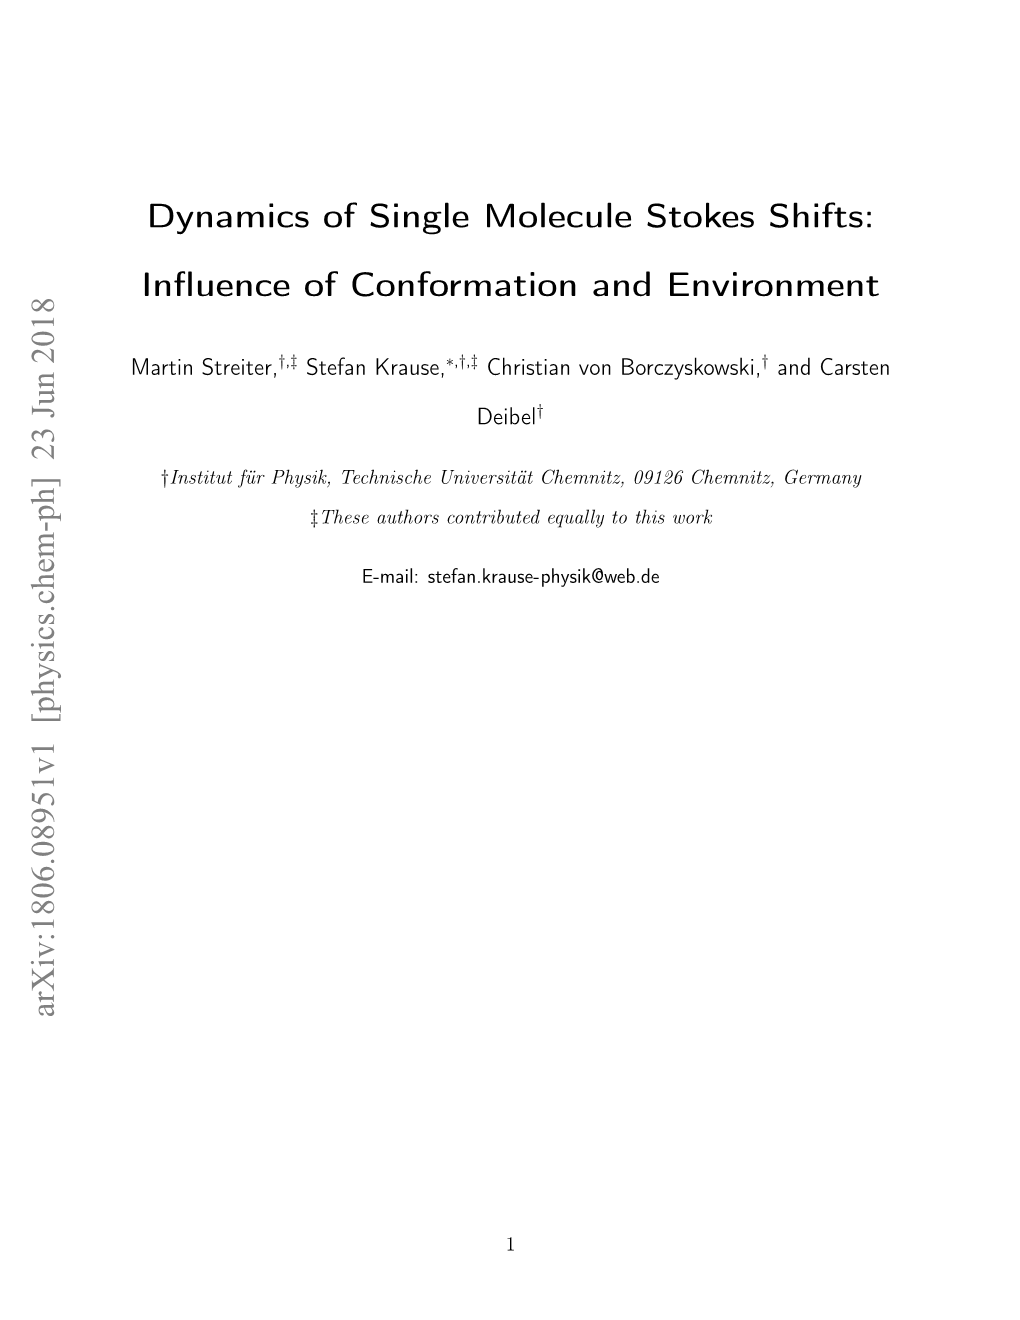 Dynamics of Single Molecule Stokes Shifts: Inﬂuence of Conformation and Environment